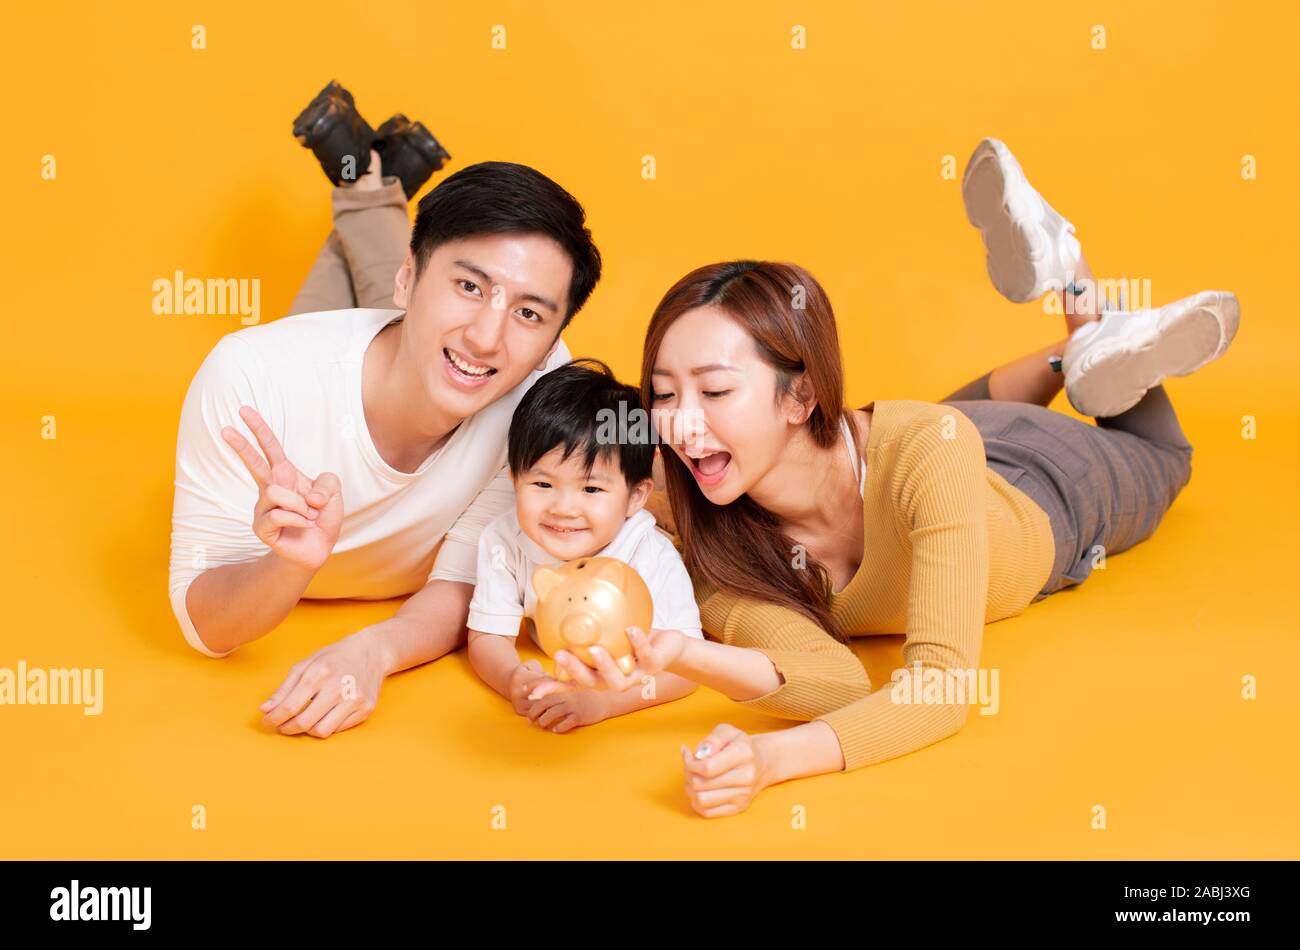 happy young family holding piggy bank Stock Photo